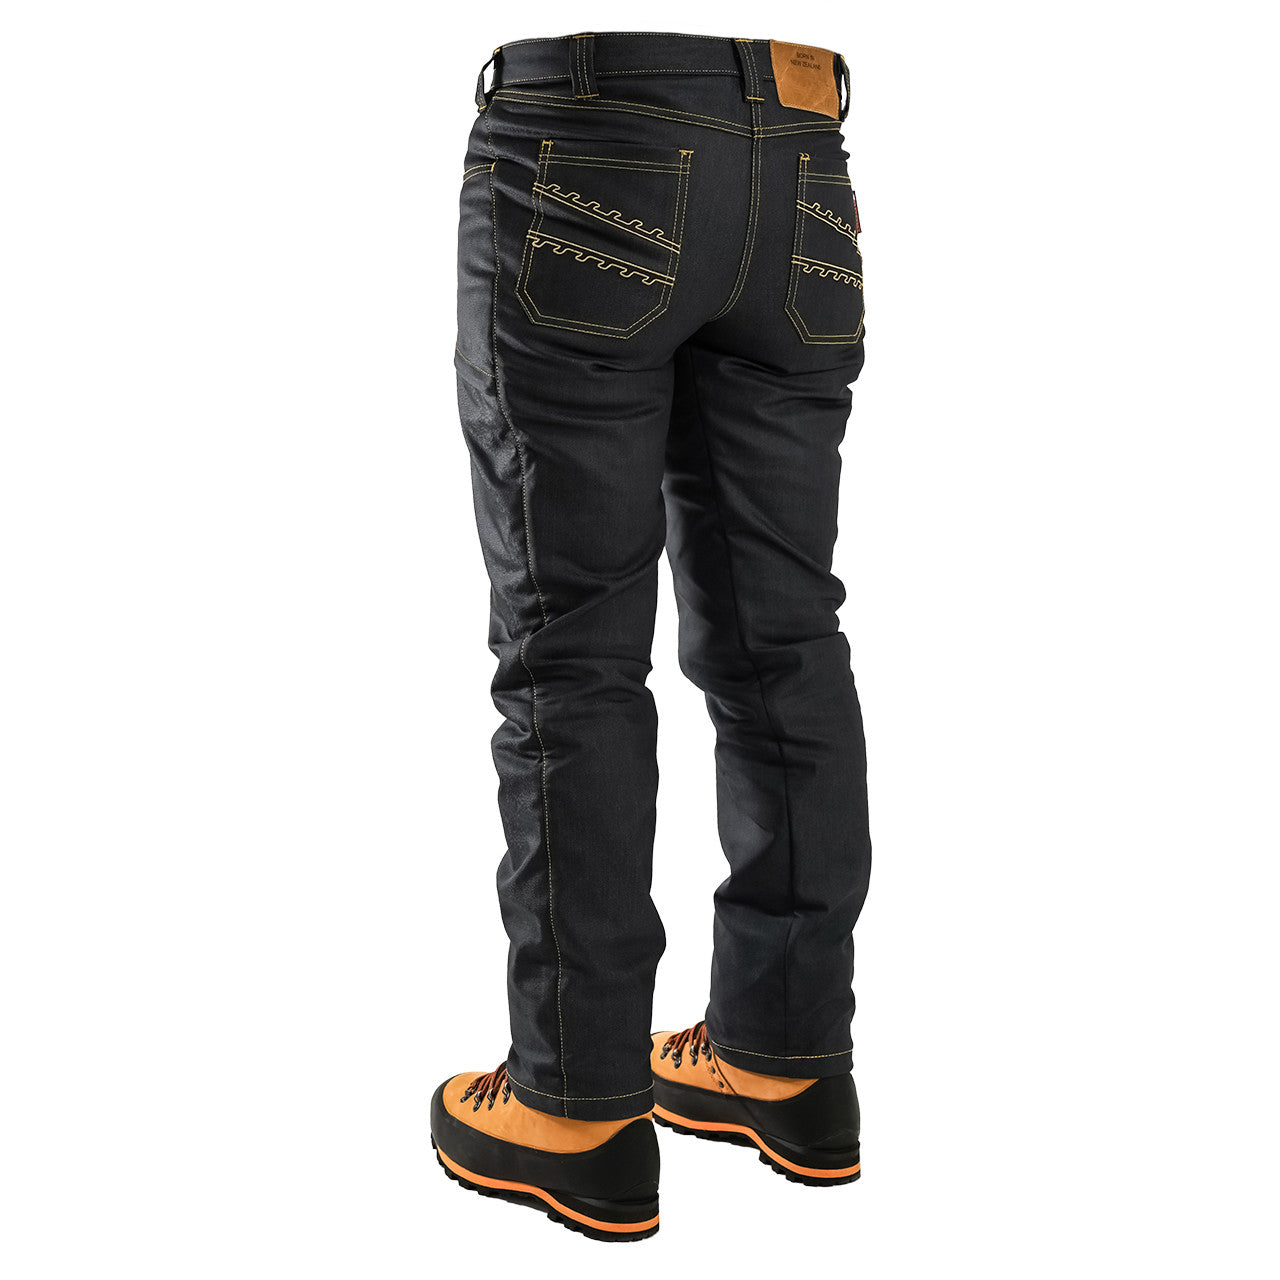 Clogger Denim Women's Chainsaw Trousers (NEW)